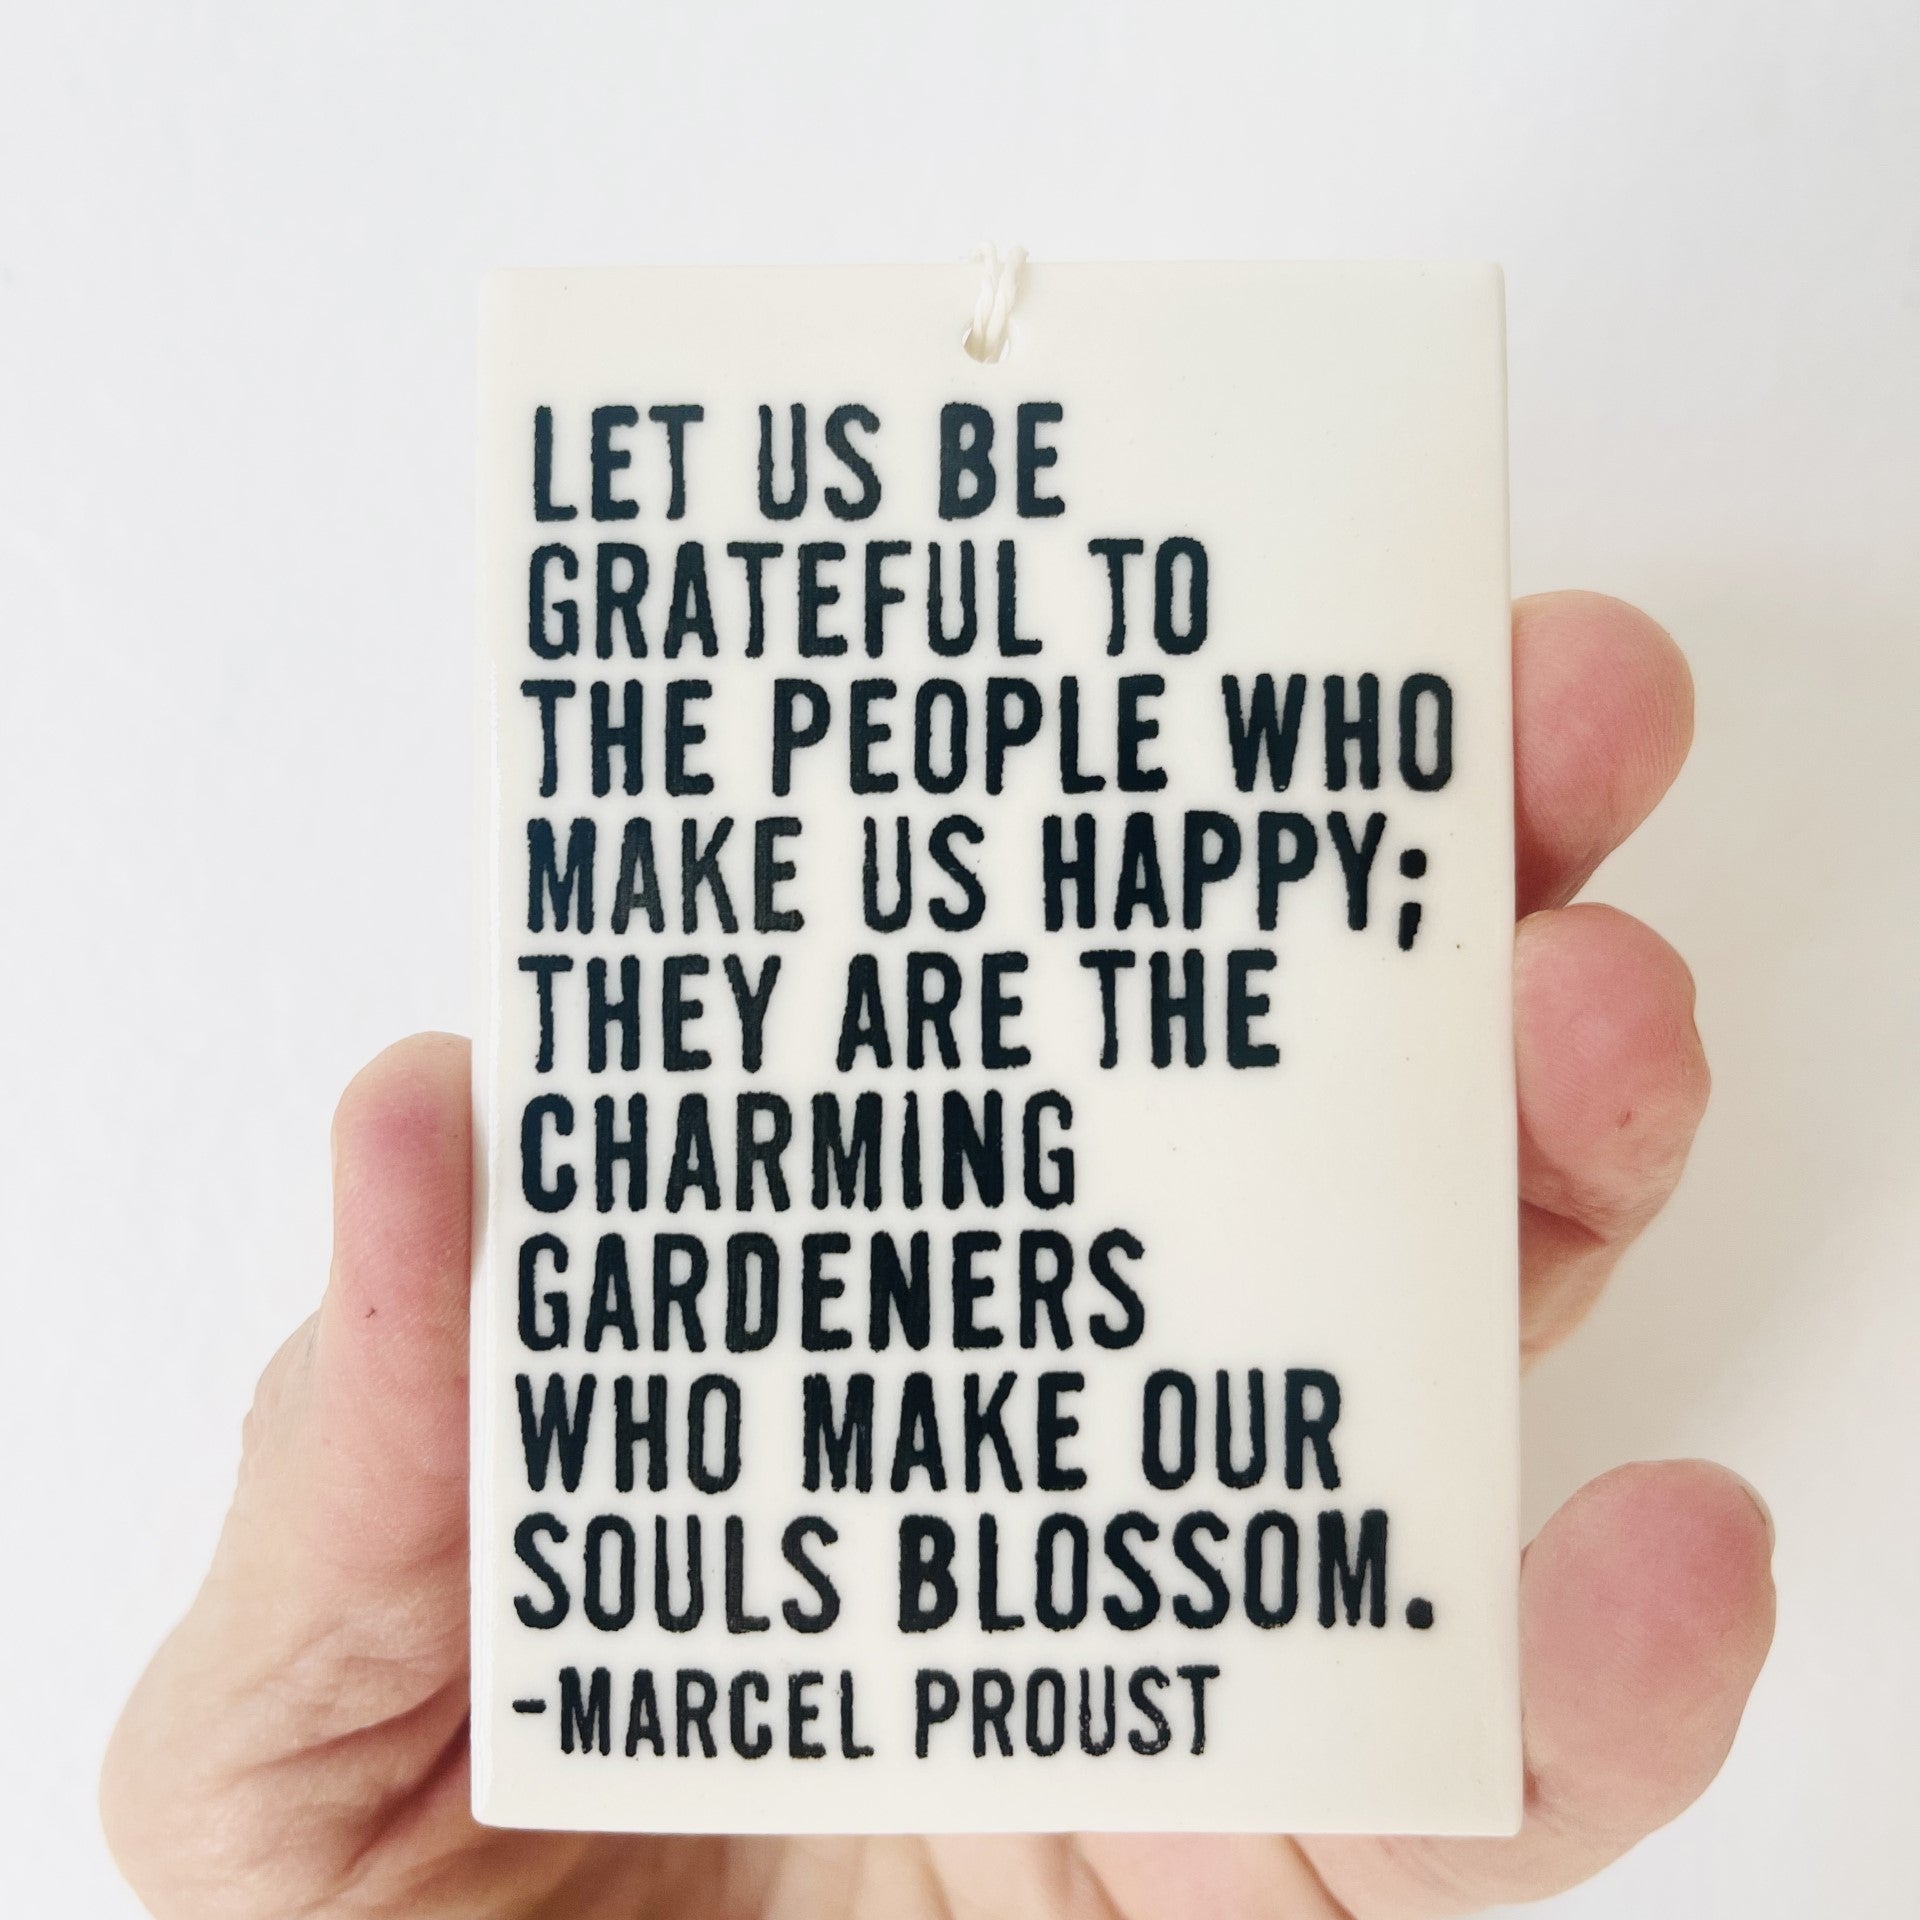 Marcel Proust - Let us be grateful to people who make us